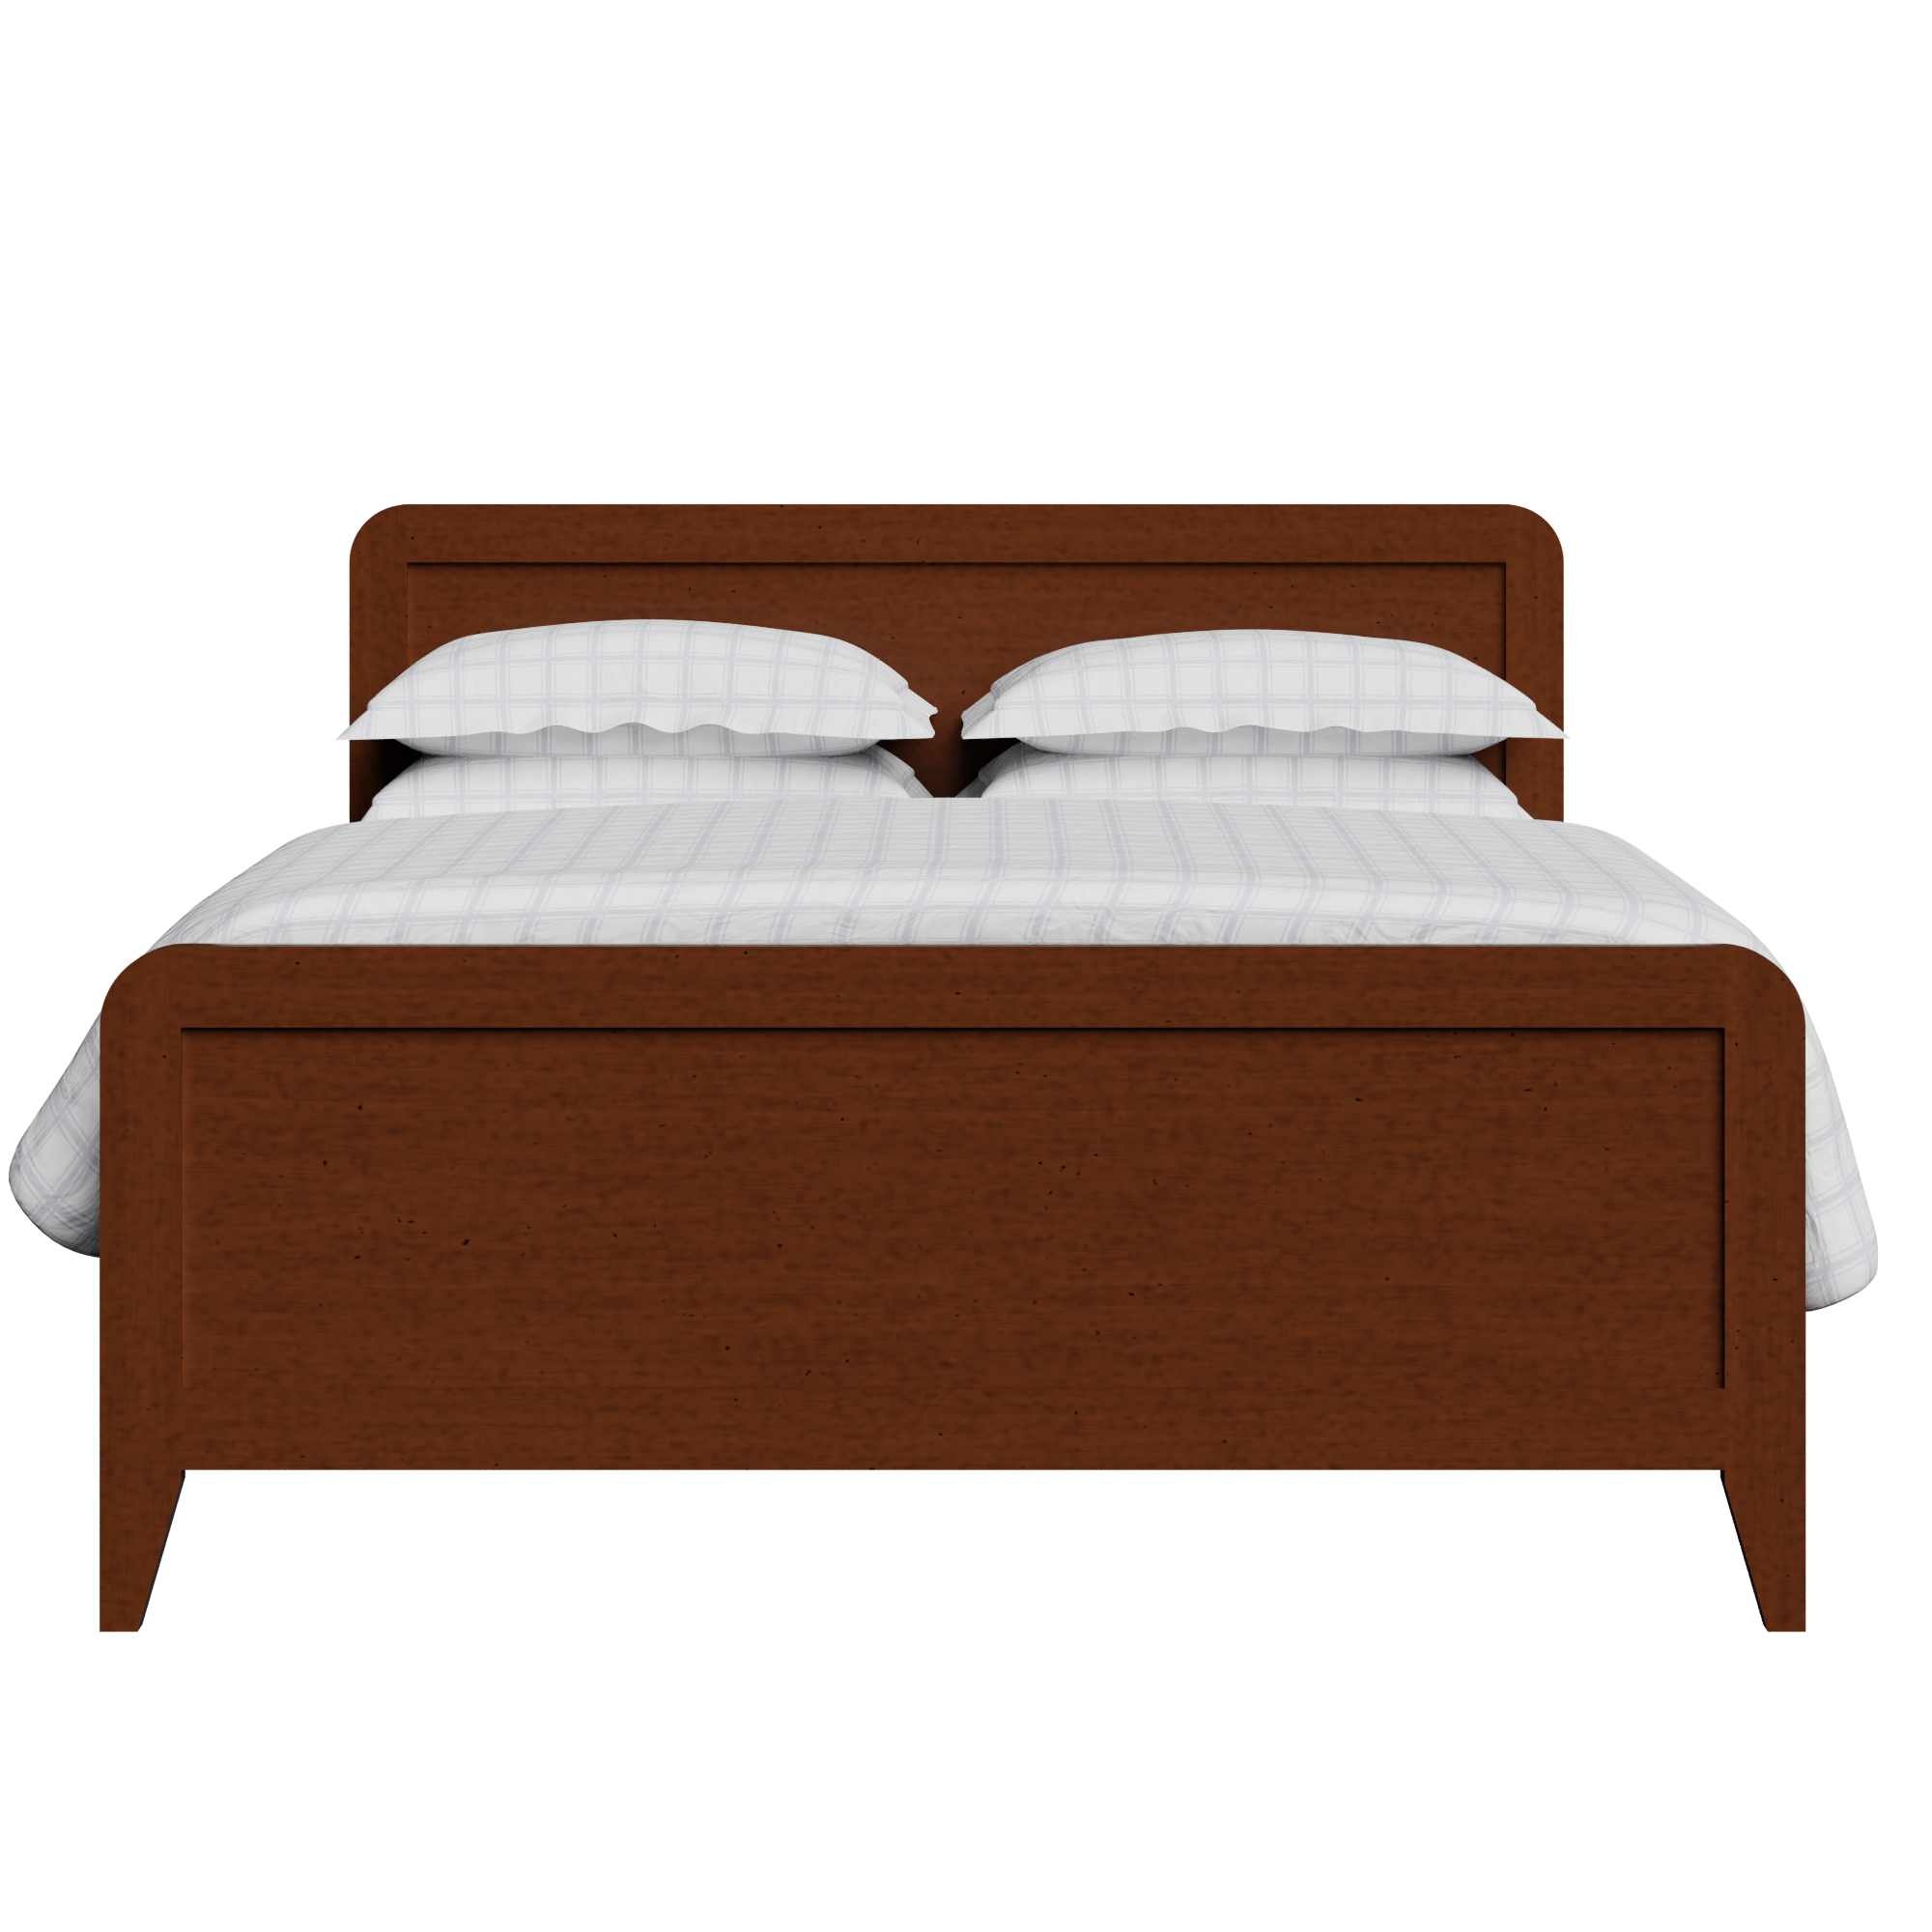 Keats Wooden Bed Frame The Original, Cherry Wood Bed Frame